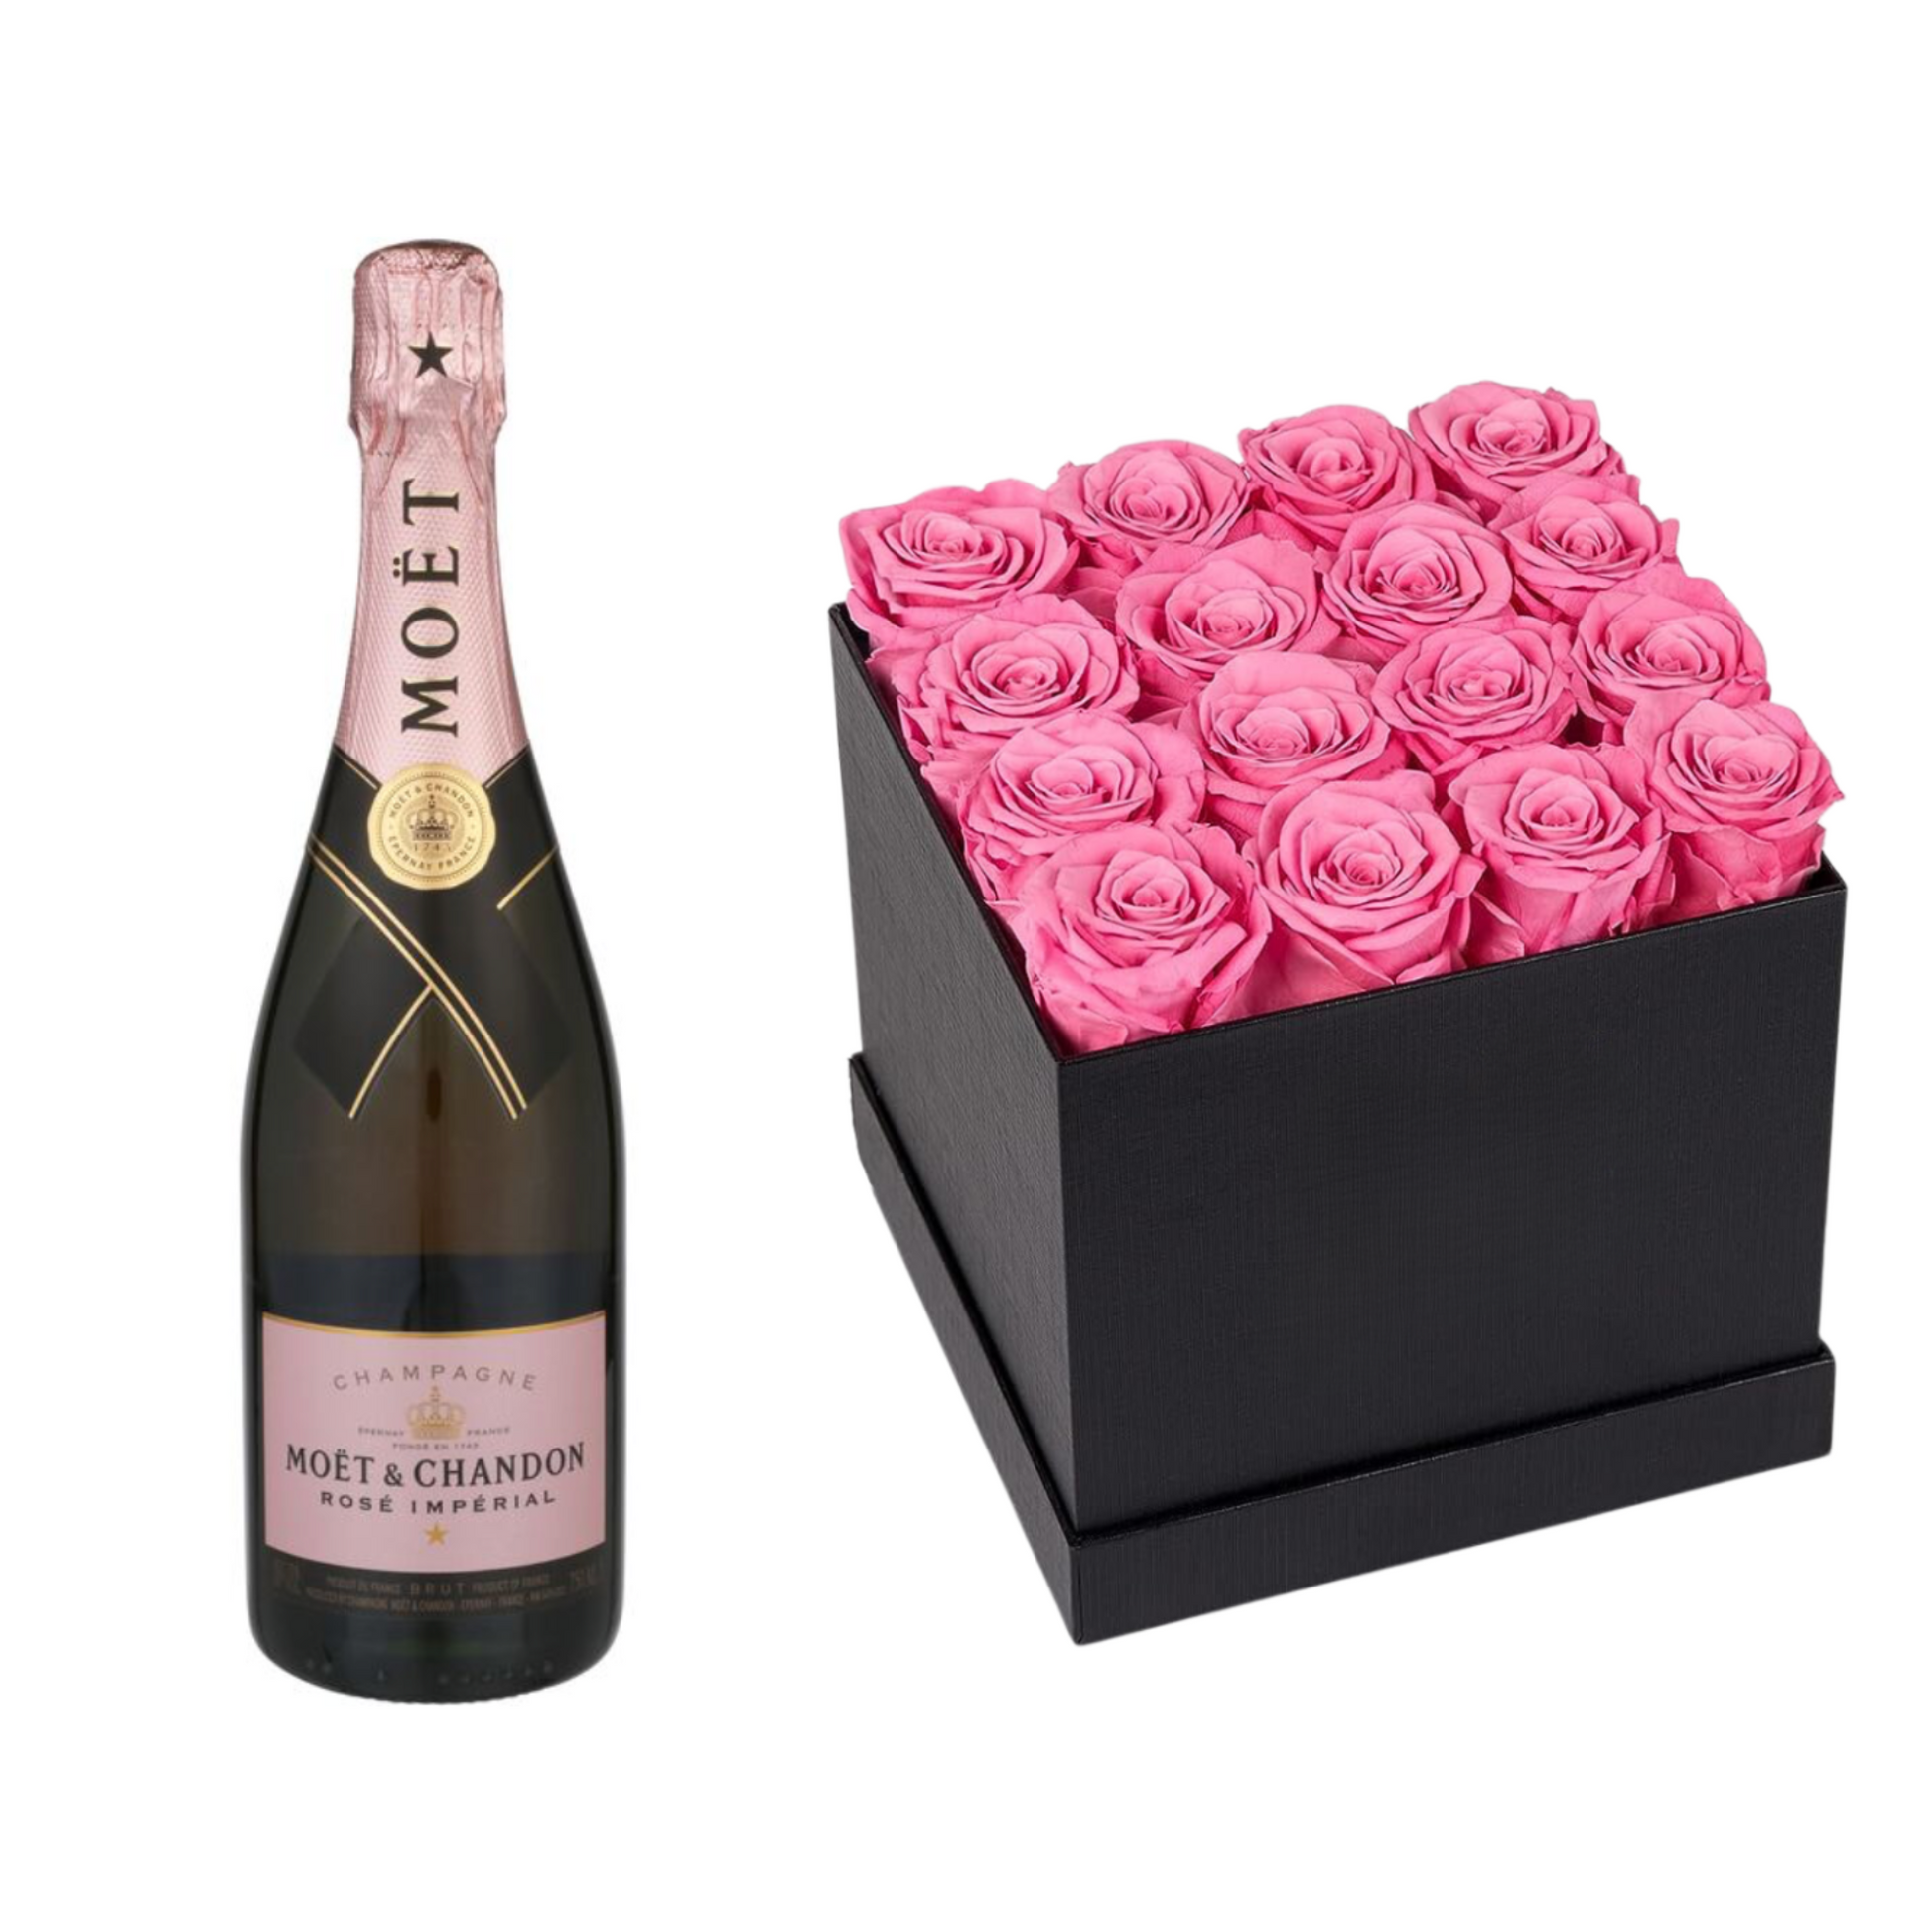 Moet & Chandon Champagne Brut Rose Imperial With Gift - Liquor Geeks